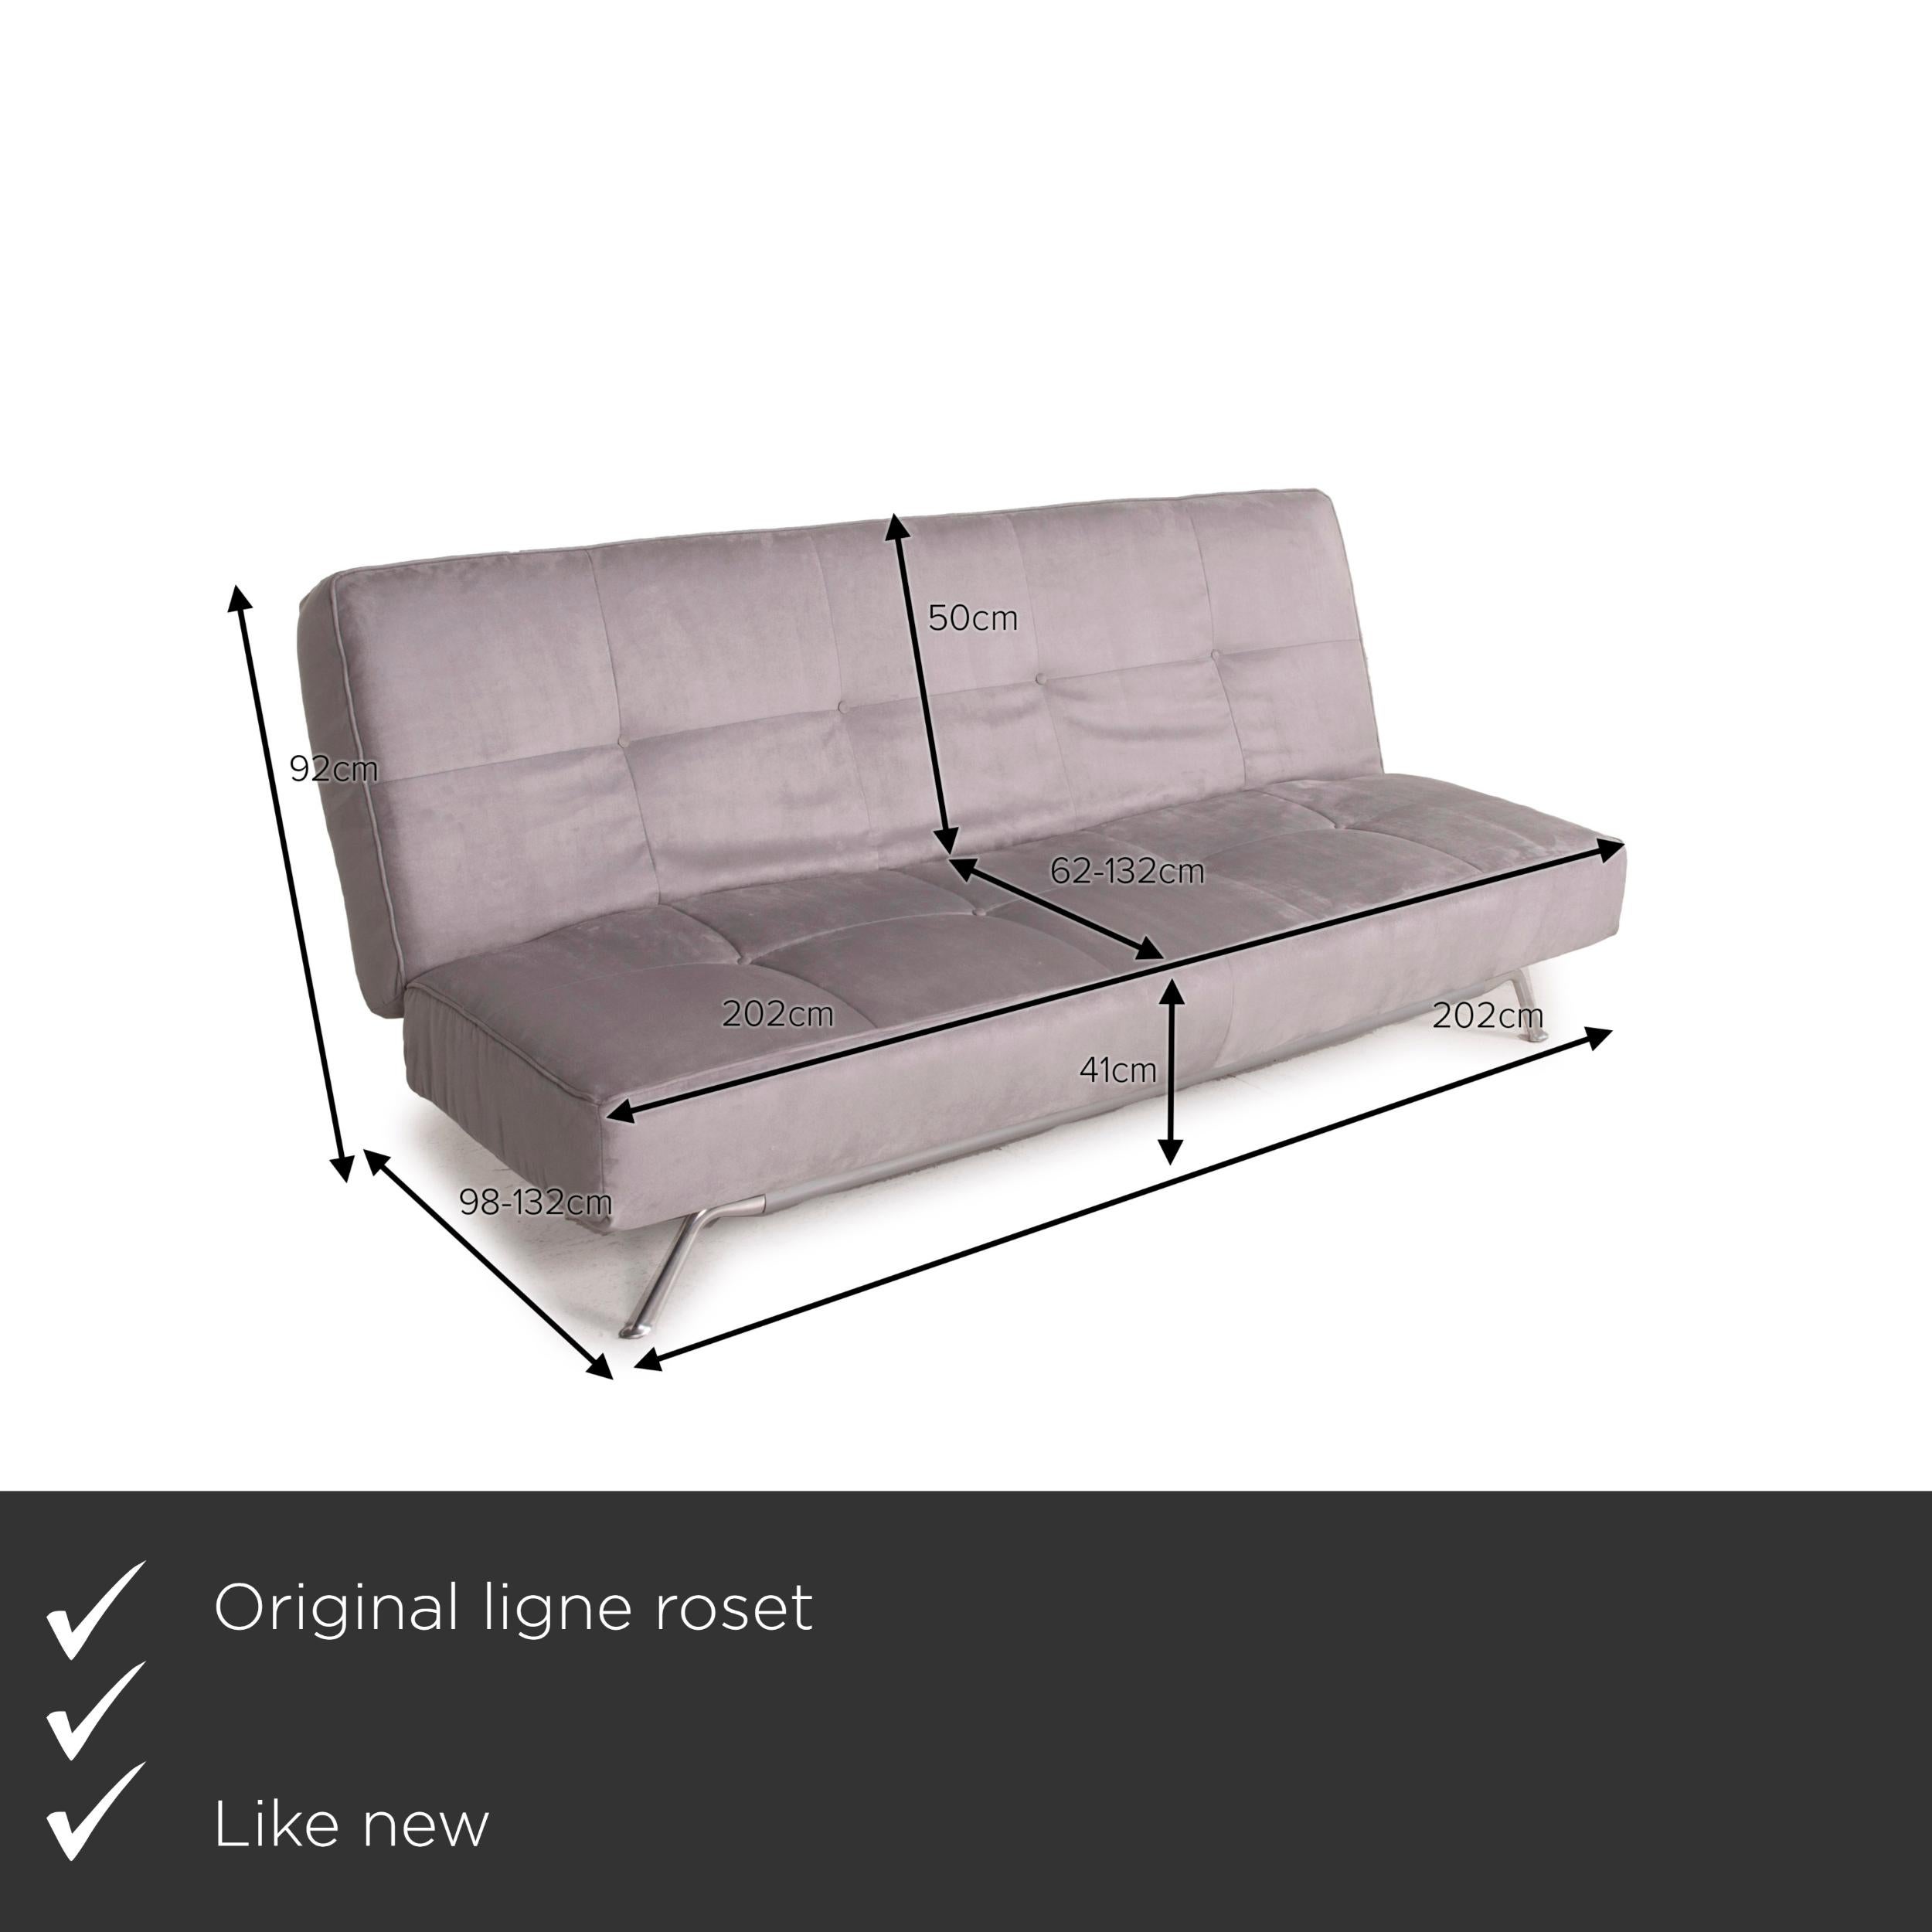 We present to you a Ligne Roset Smala fabric sofa gray three-seater function reclining function.

Product measurements in centimeters:

Depth 98
Width 202
Height 92
Seat height 41
Seat depth 62
Seat width 202
Back height 50.



 